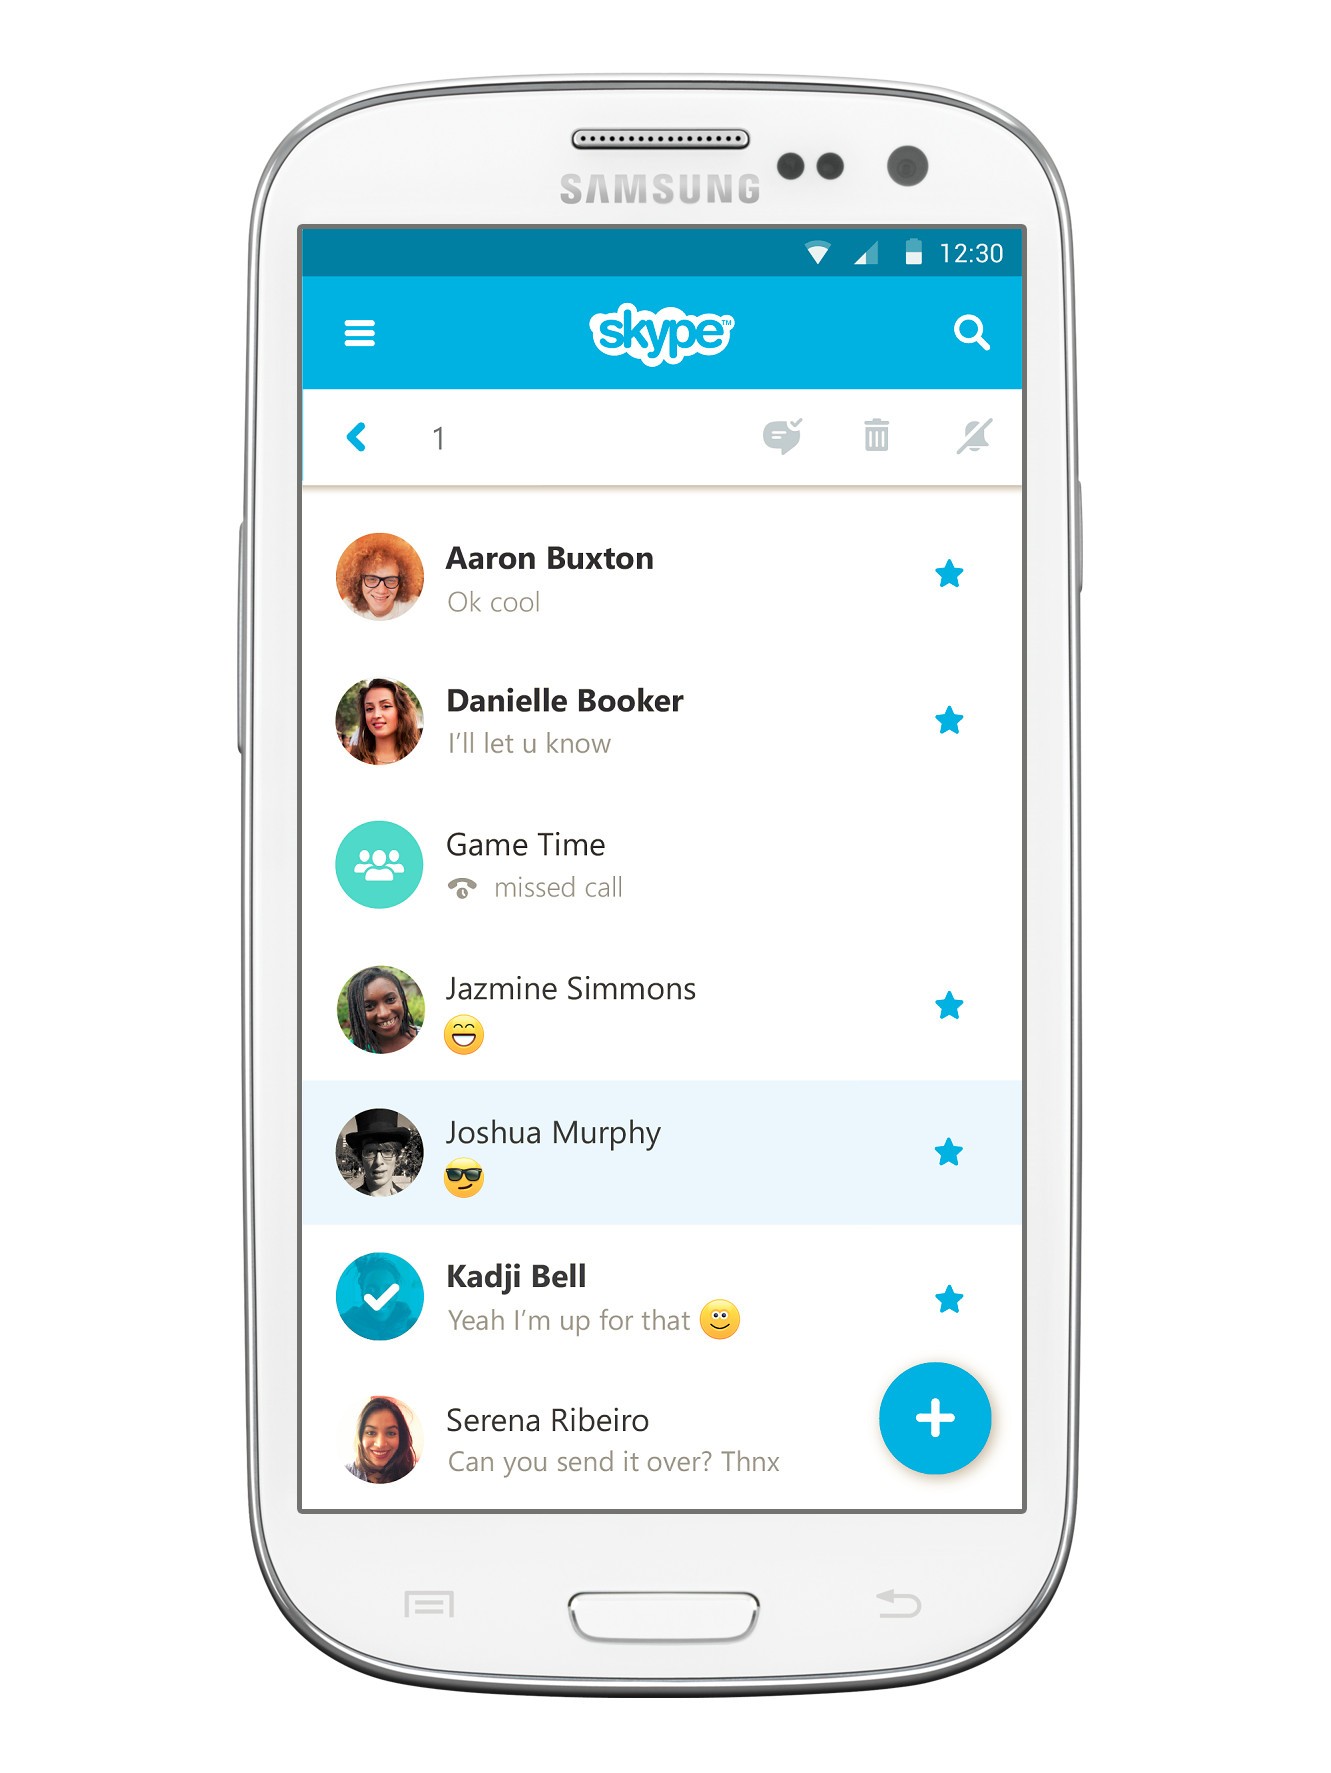 download the last version for android Skype 8.99.0.403